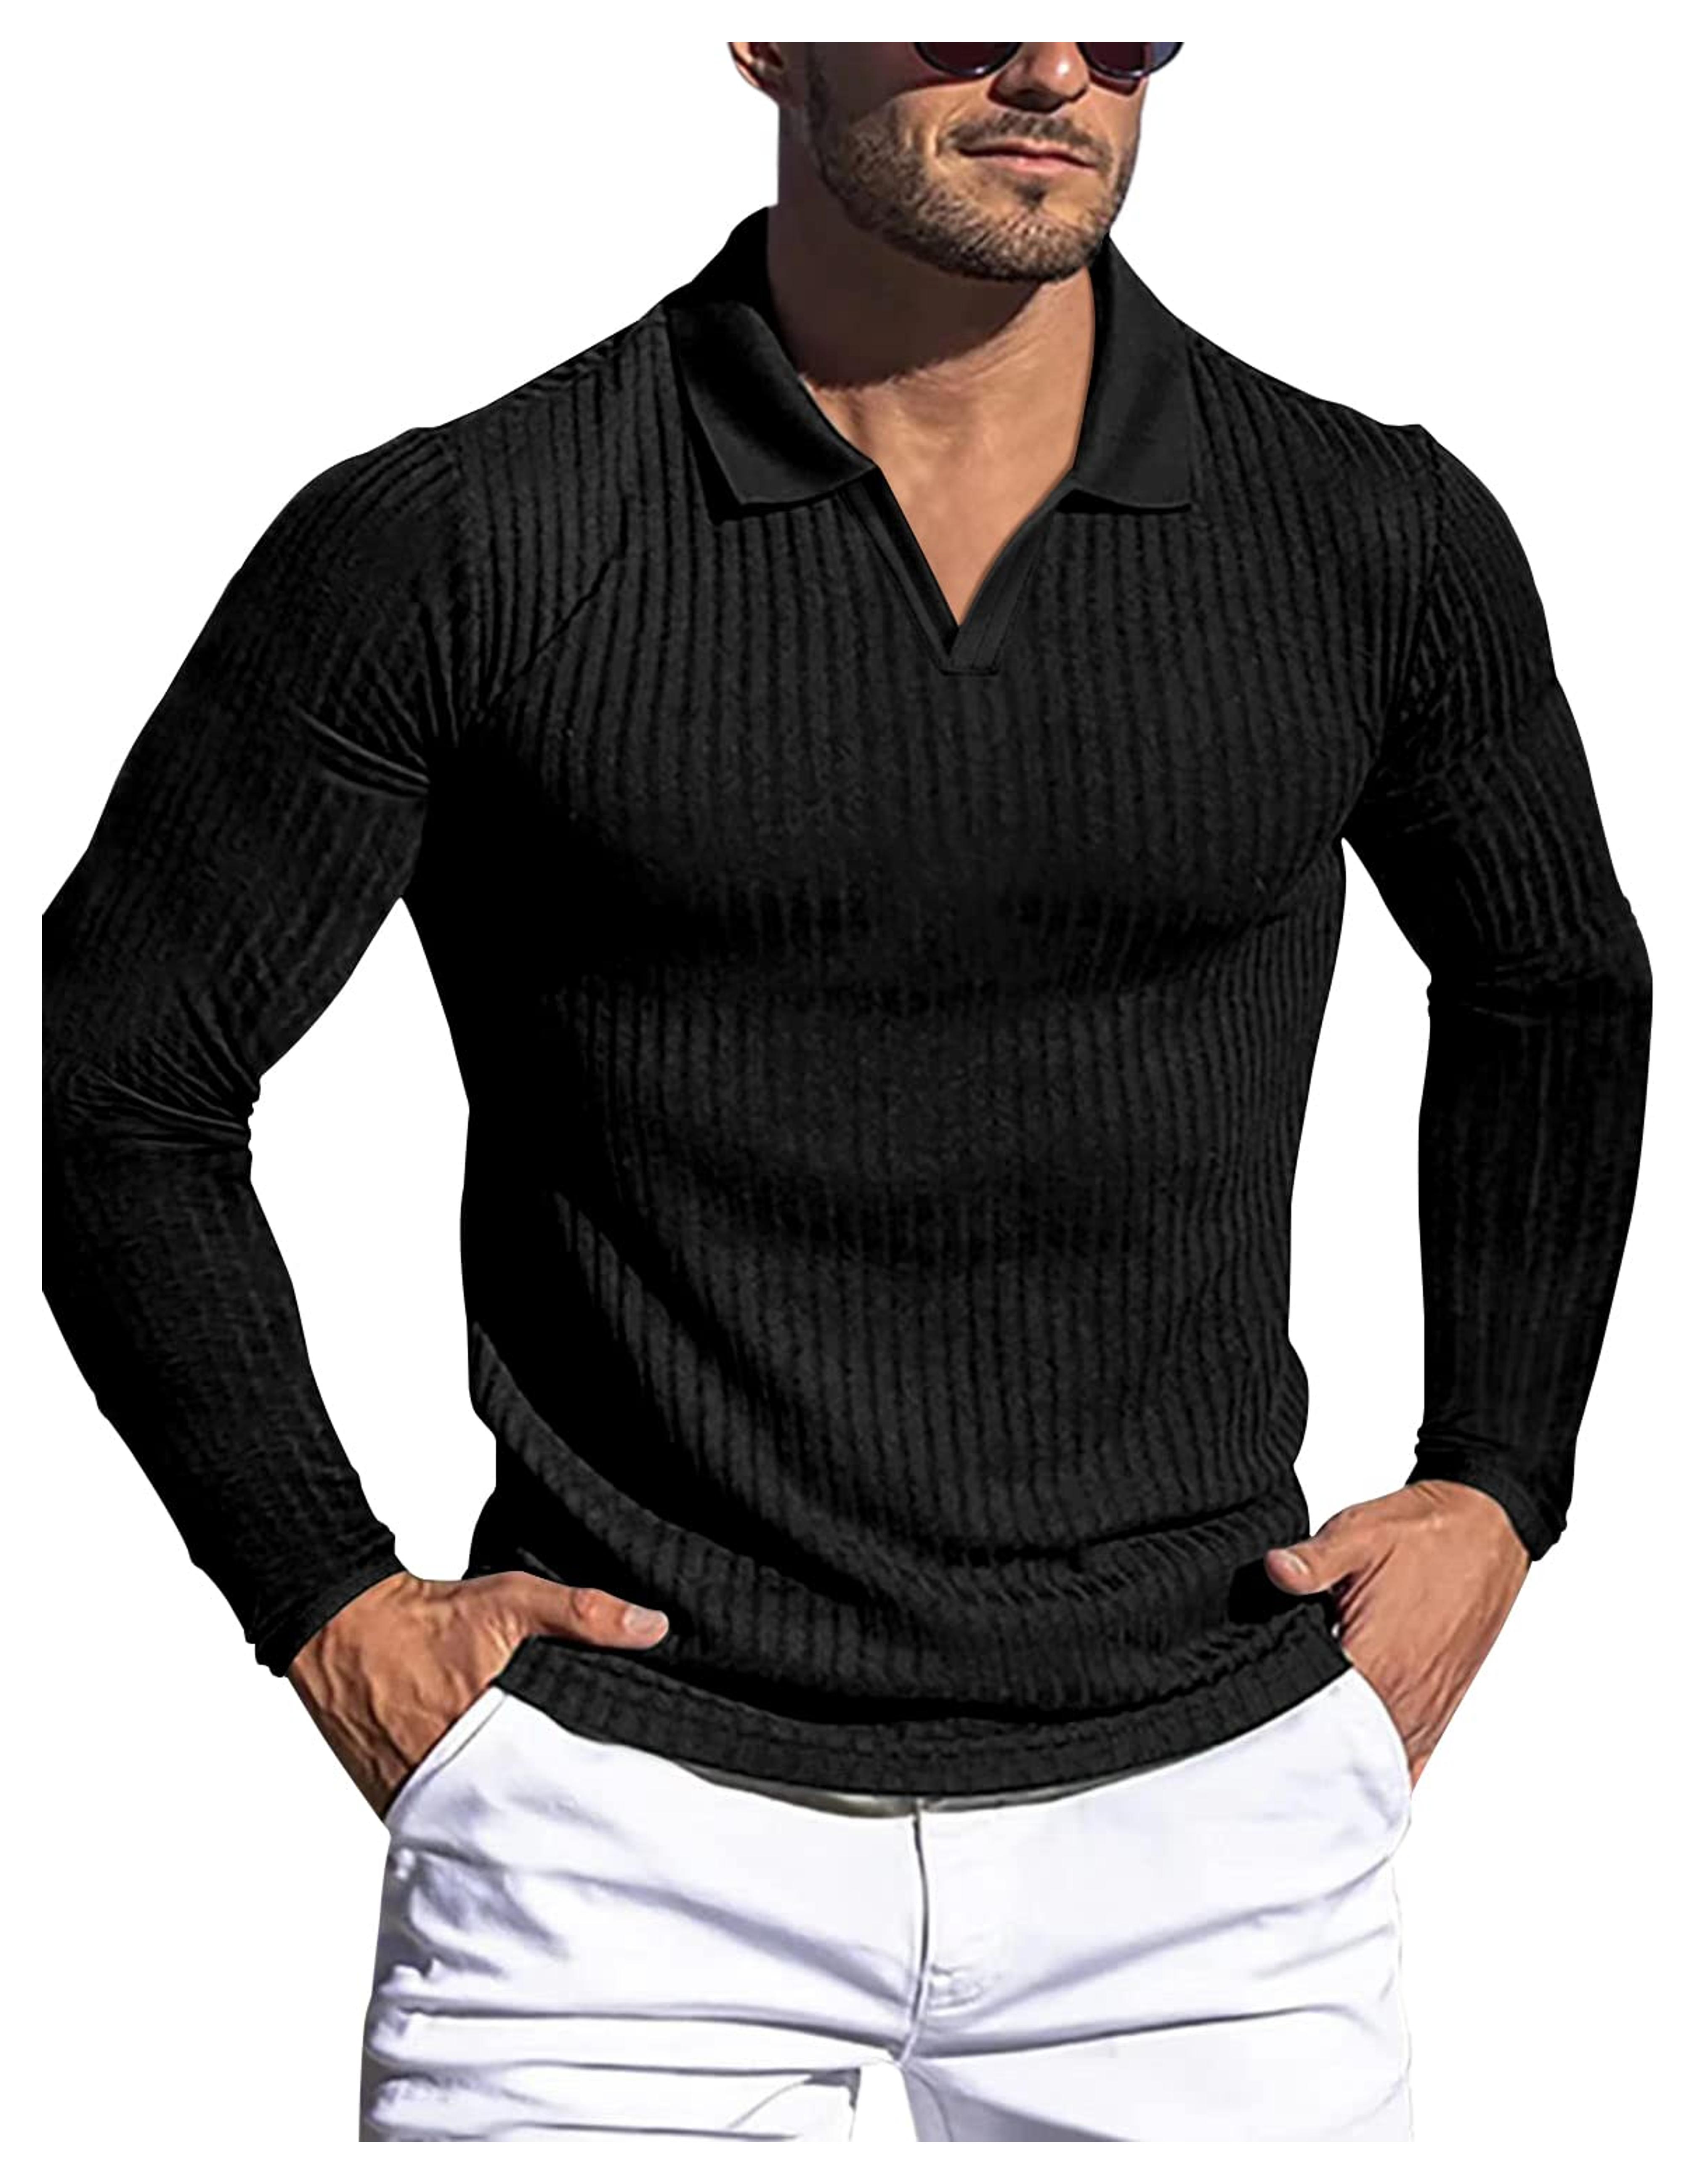 Gnvviwl Men's Muscle V Neck Polo Shirts Slim Fit Long Sleeve Cotton Golf T-Shirts Ribbed Knit Soft Tees Z-Black at Amazon Men’s Clothing store